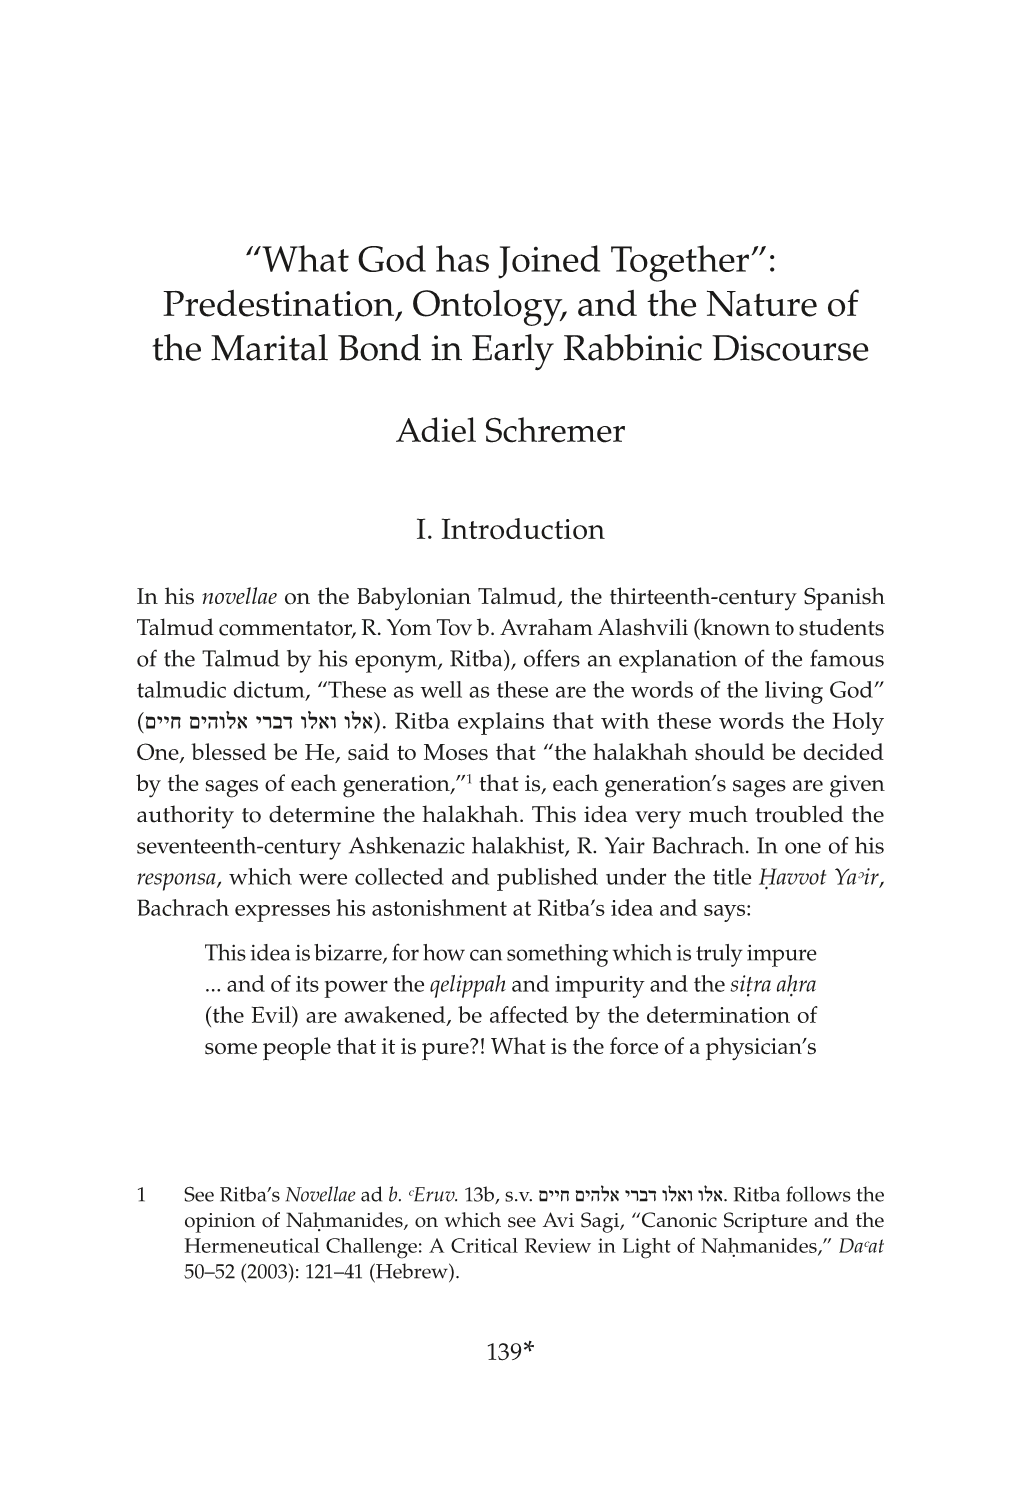 “What God Has Joined Together”: Predestination, Ontology, and the Nature of the Marital Bond in Early Rabbinic Discourse